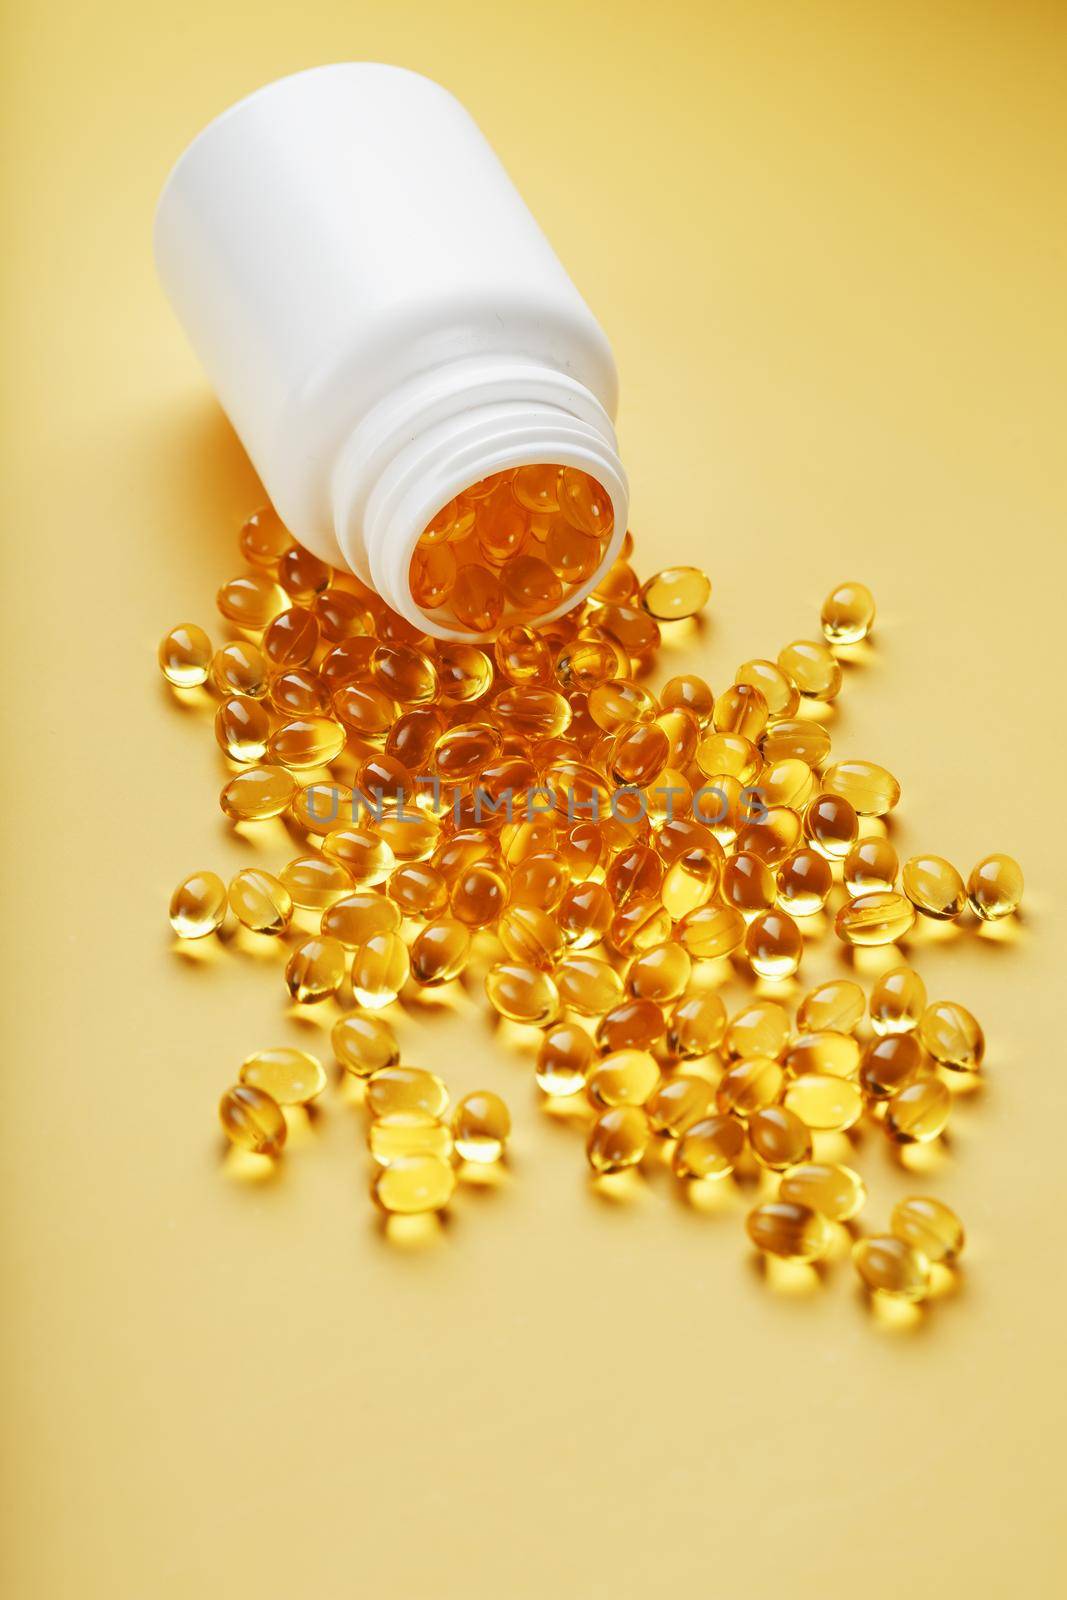 Golden Omega-3 fish oil capsules poured out of a jar on a yellow background by AlexGrec